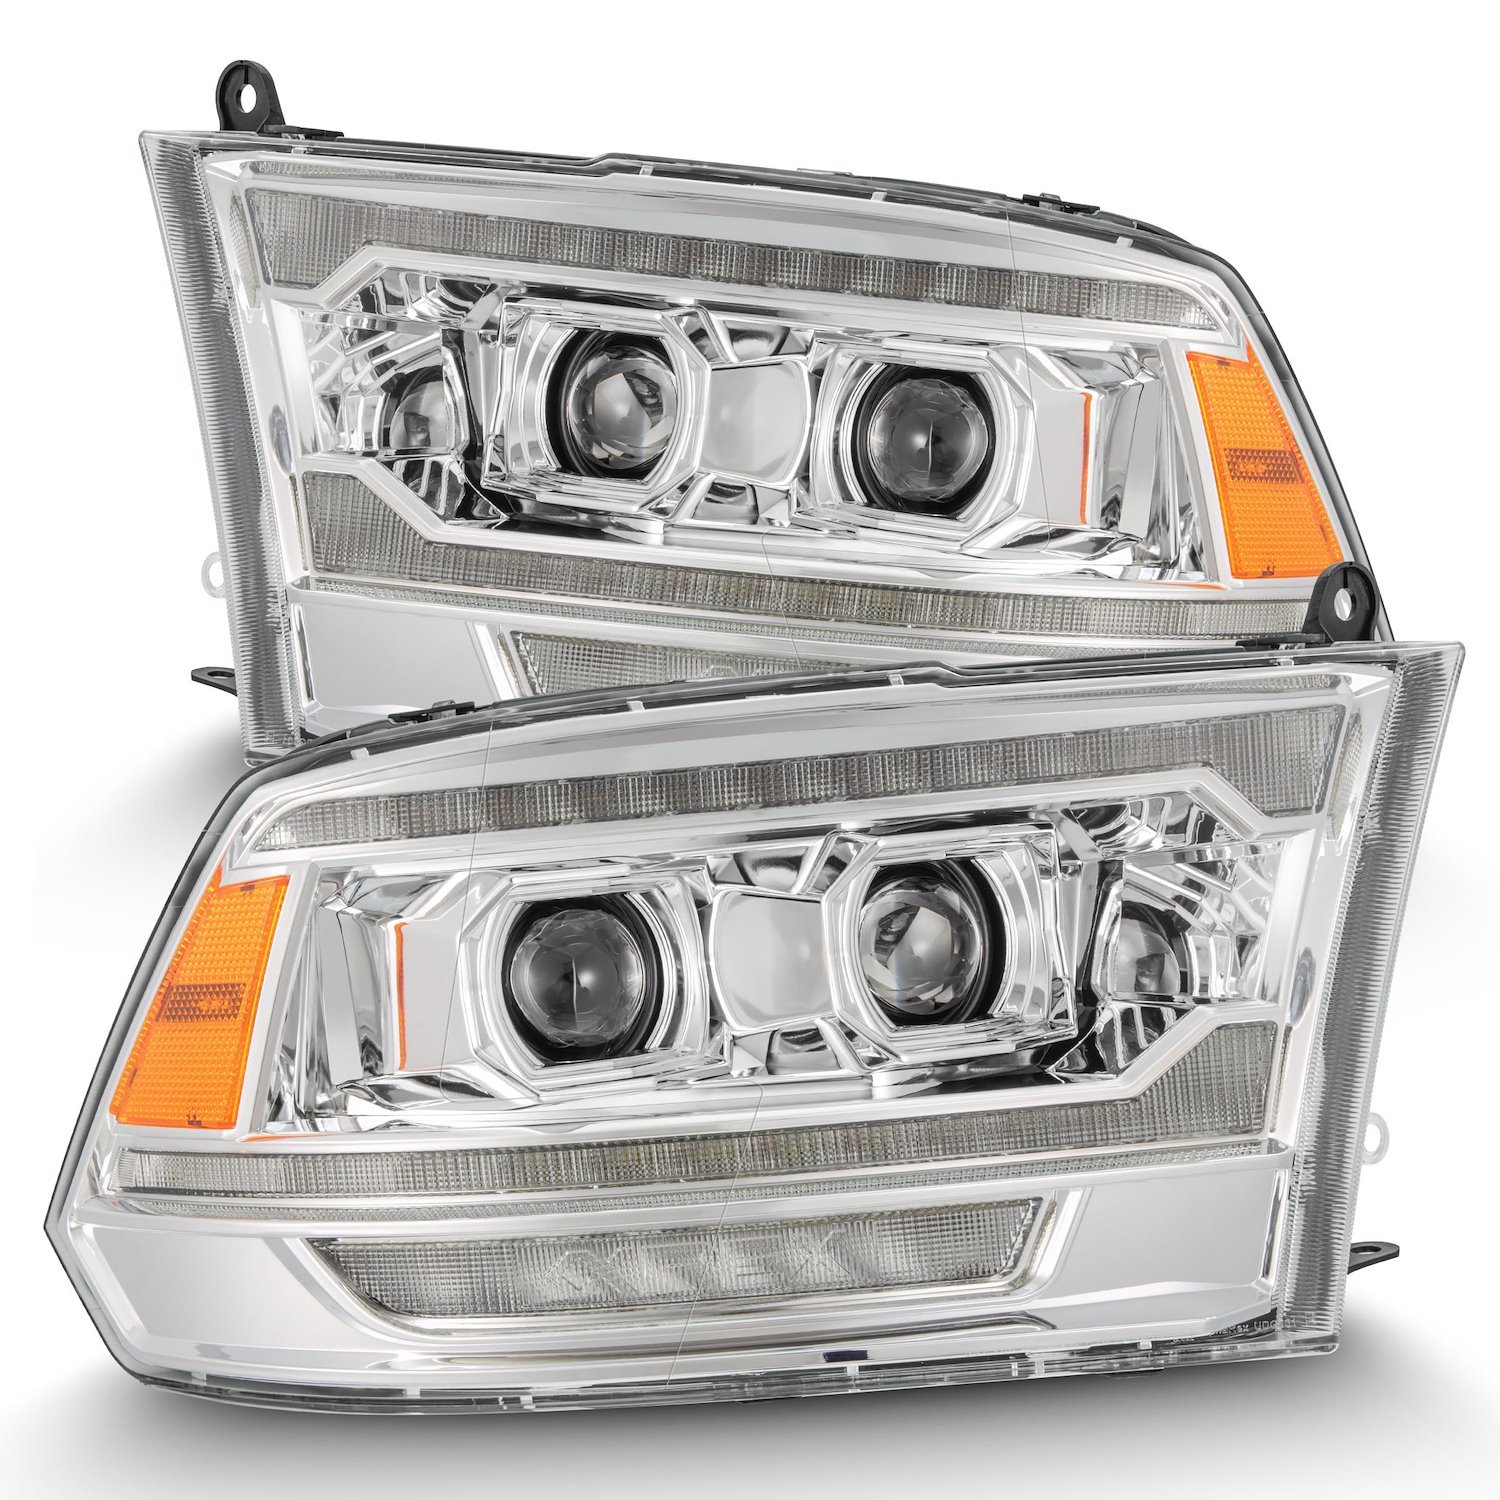 880559 Luxx-Series LED Projector Headlights for 2009-2018 Dodge/RAM 1500/2500/3500 - Chrome